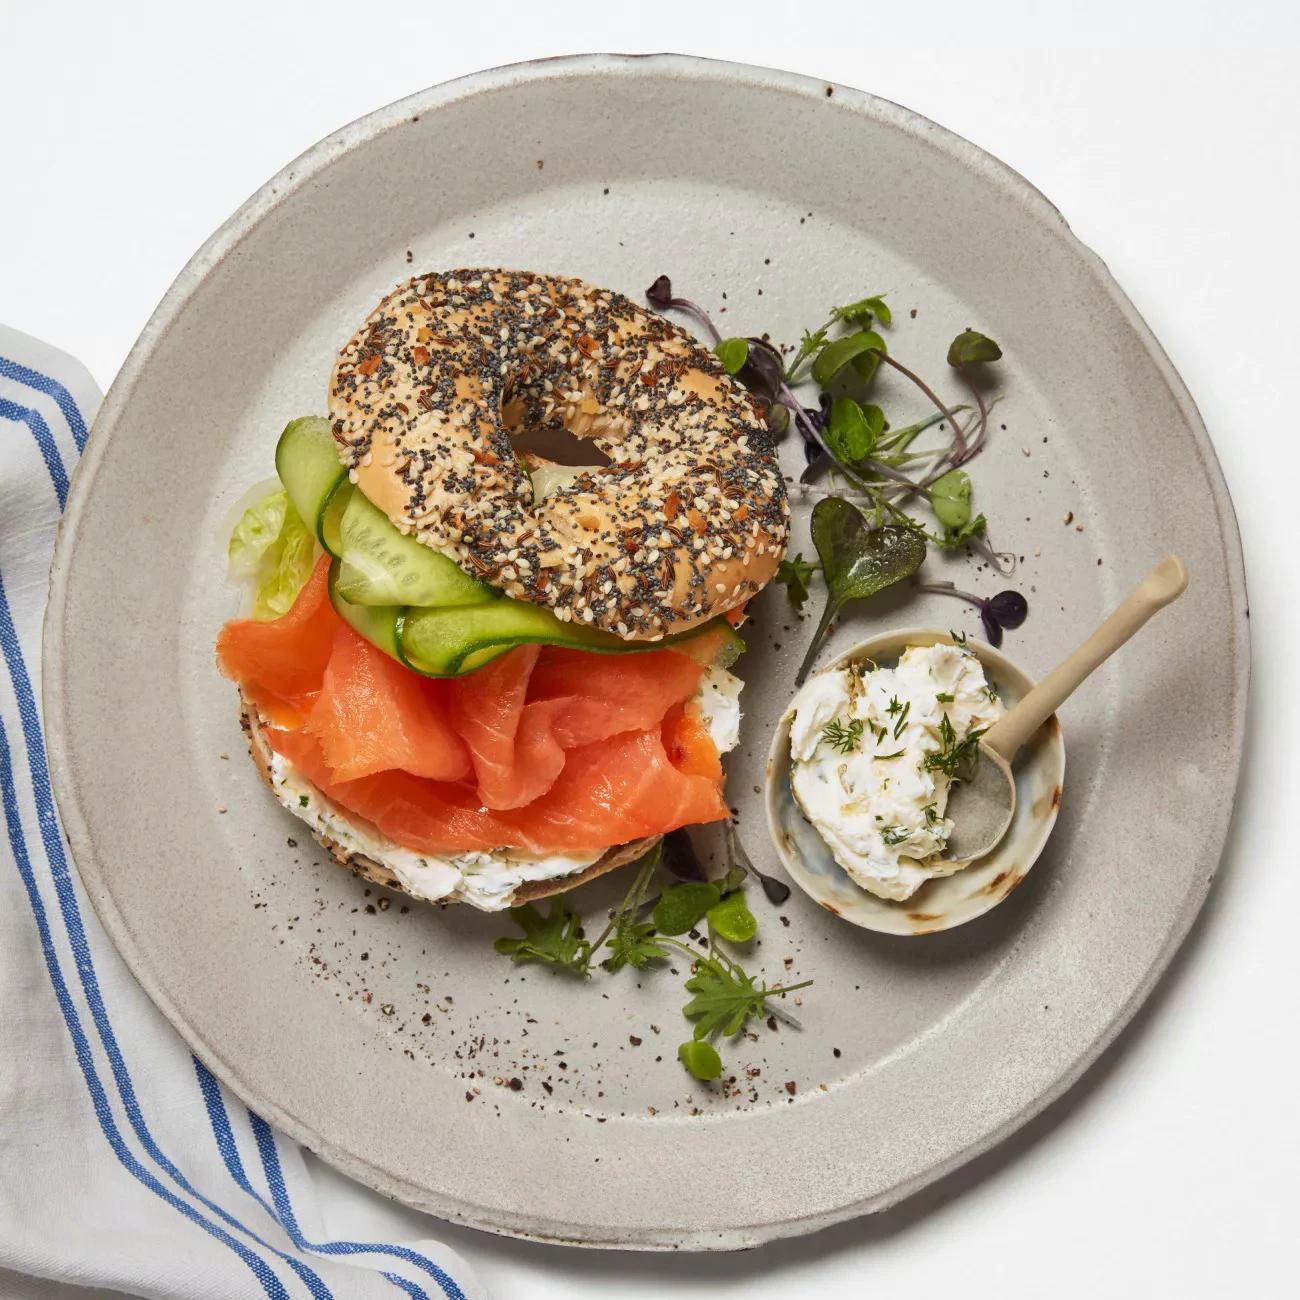 smoked salmon on a bagel crossword - What's a three letter word for smoked salmon